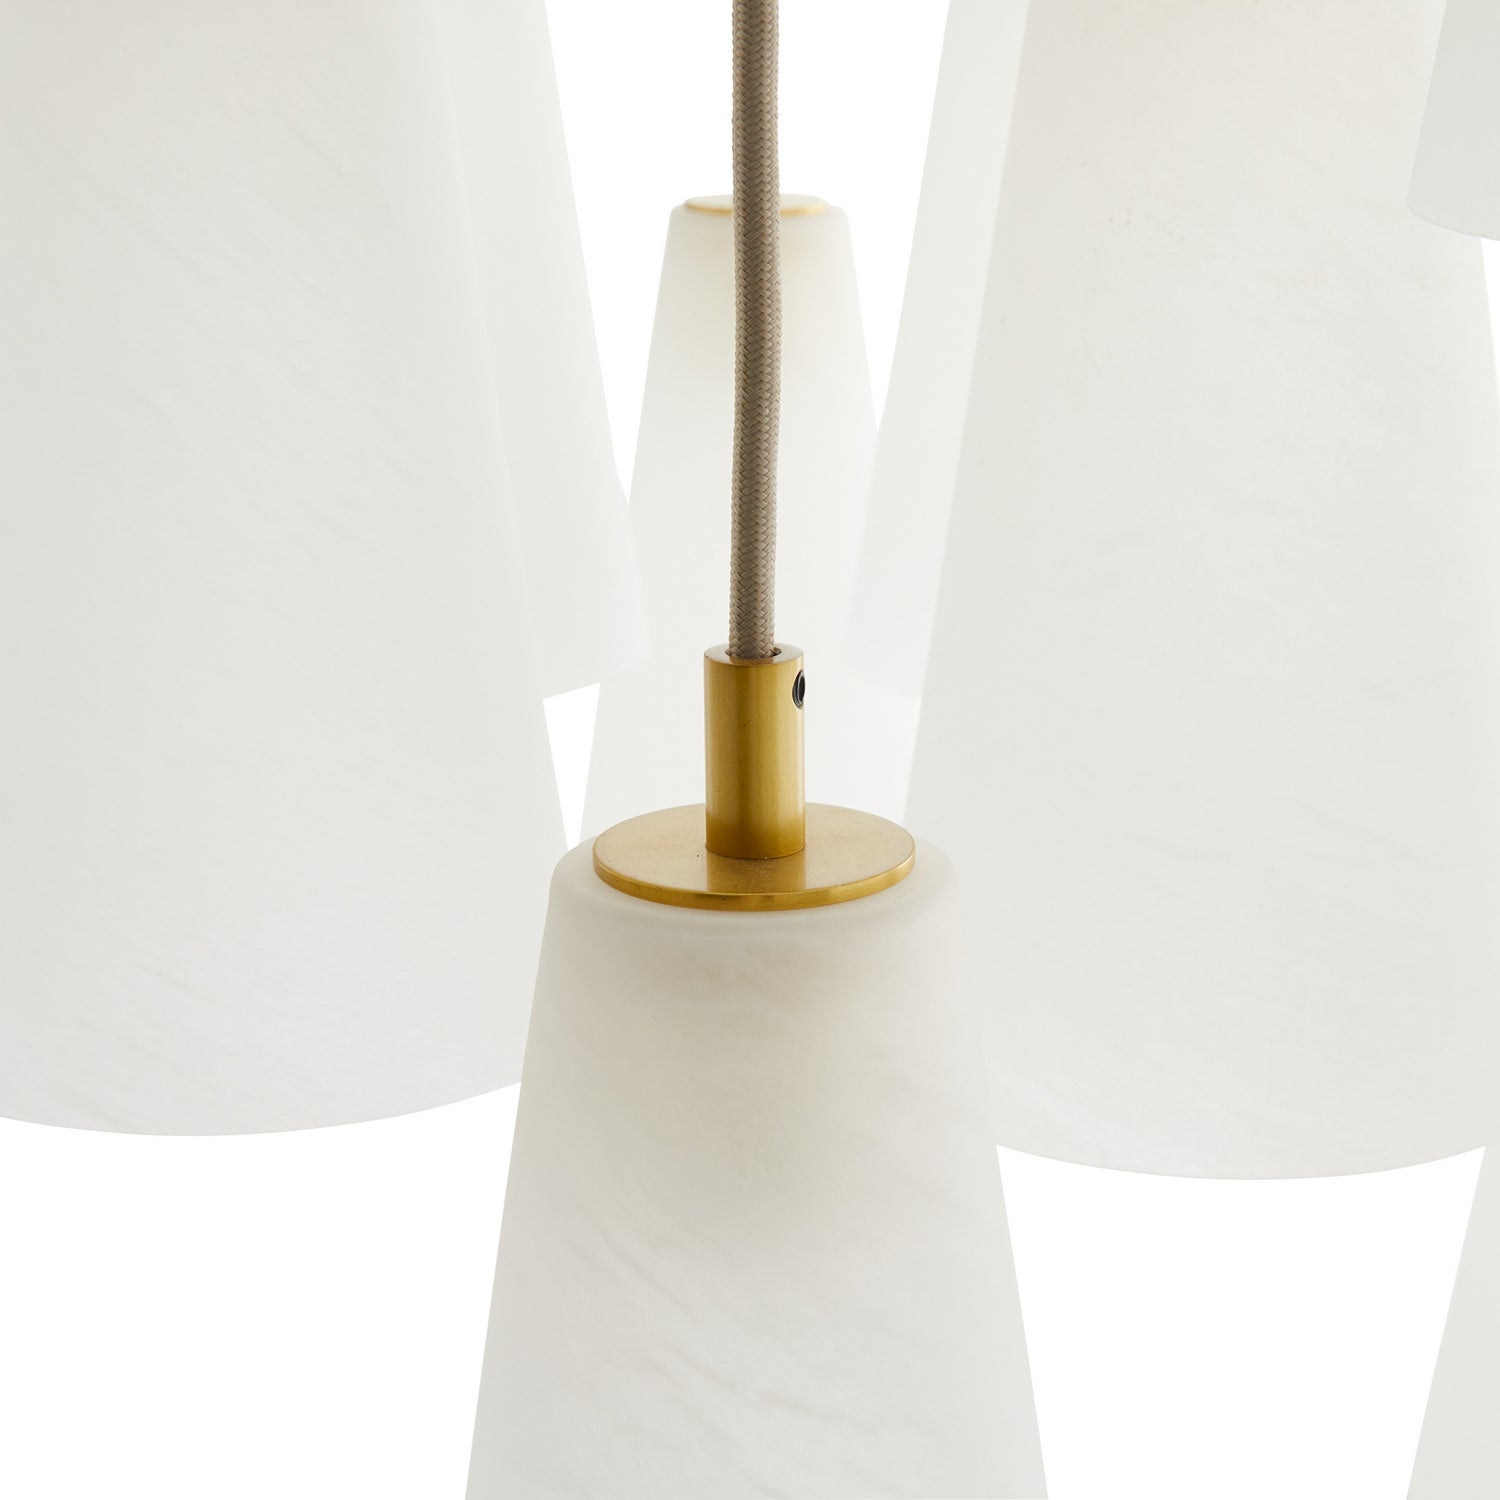 18 Light Chandelier from the Mika collection in Opal Swirl finish